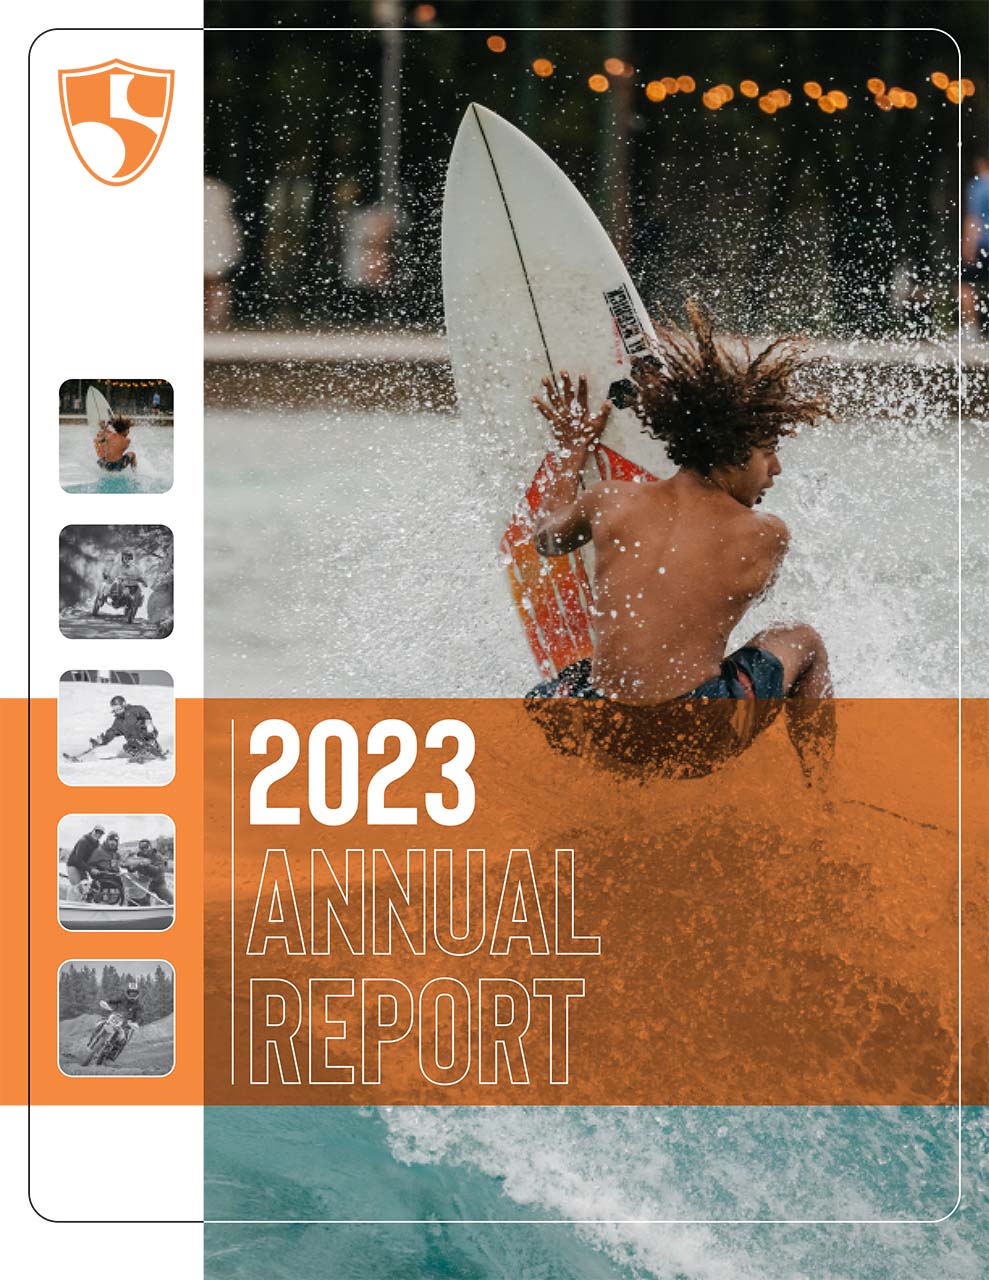 2023 high fives foundation annual report cover